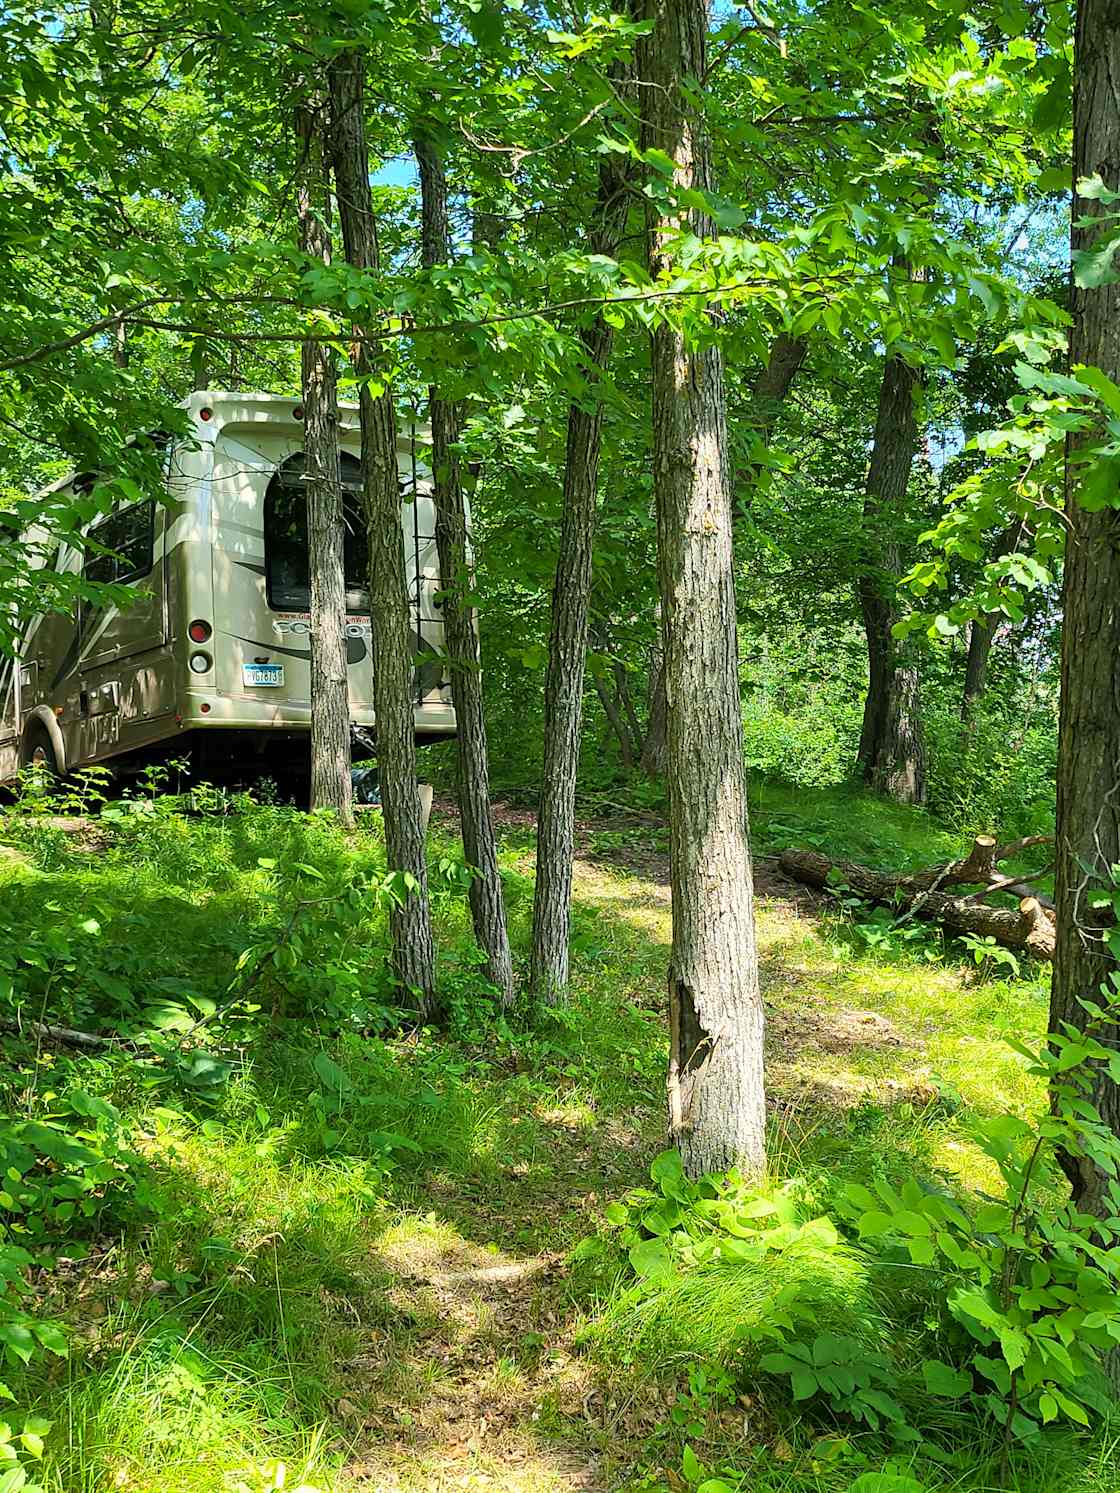 Example of an RV on the gravel site, it is level for smaller RVs but may need some leveling if your RV is over 25 feet. There is a path along the shore to your private seating area.